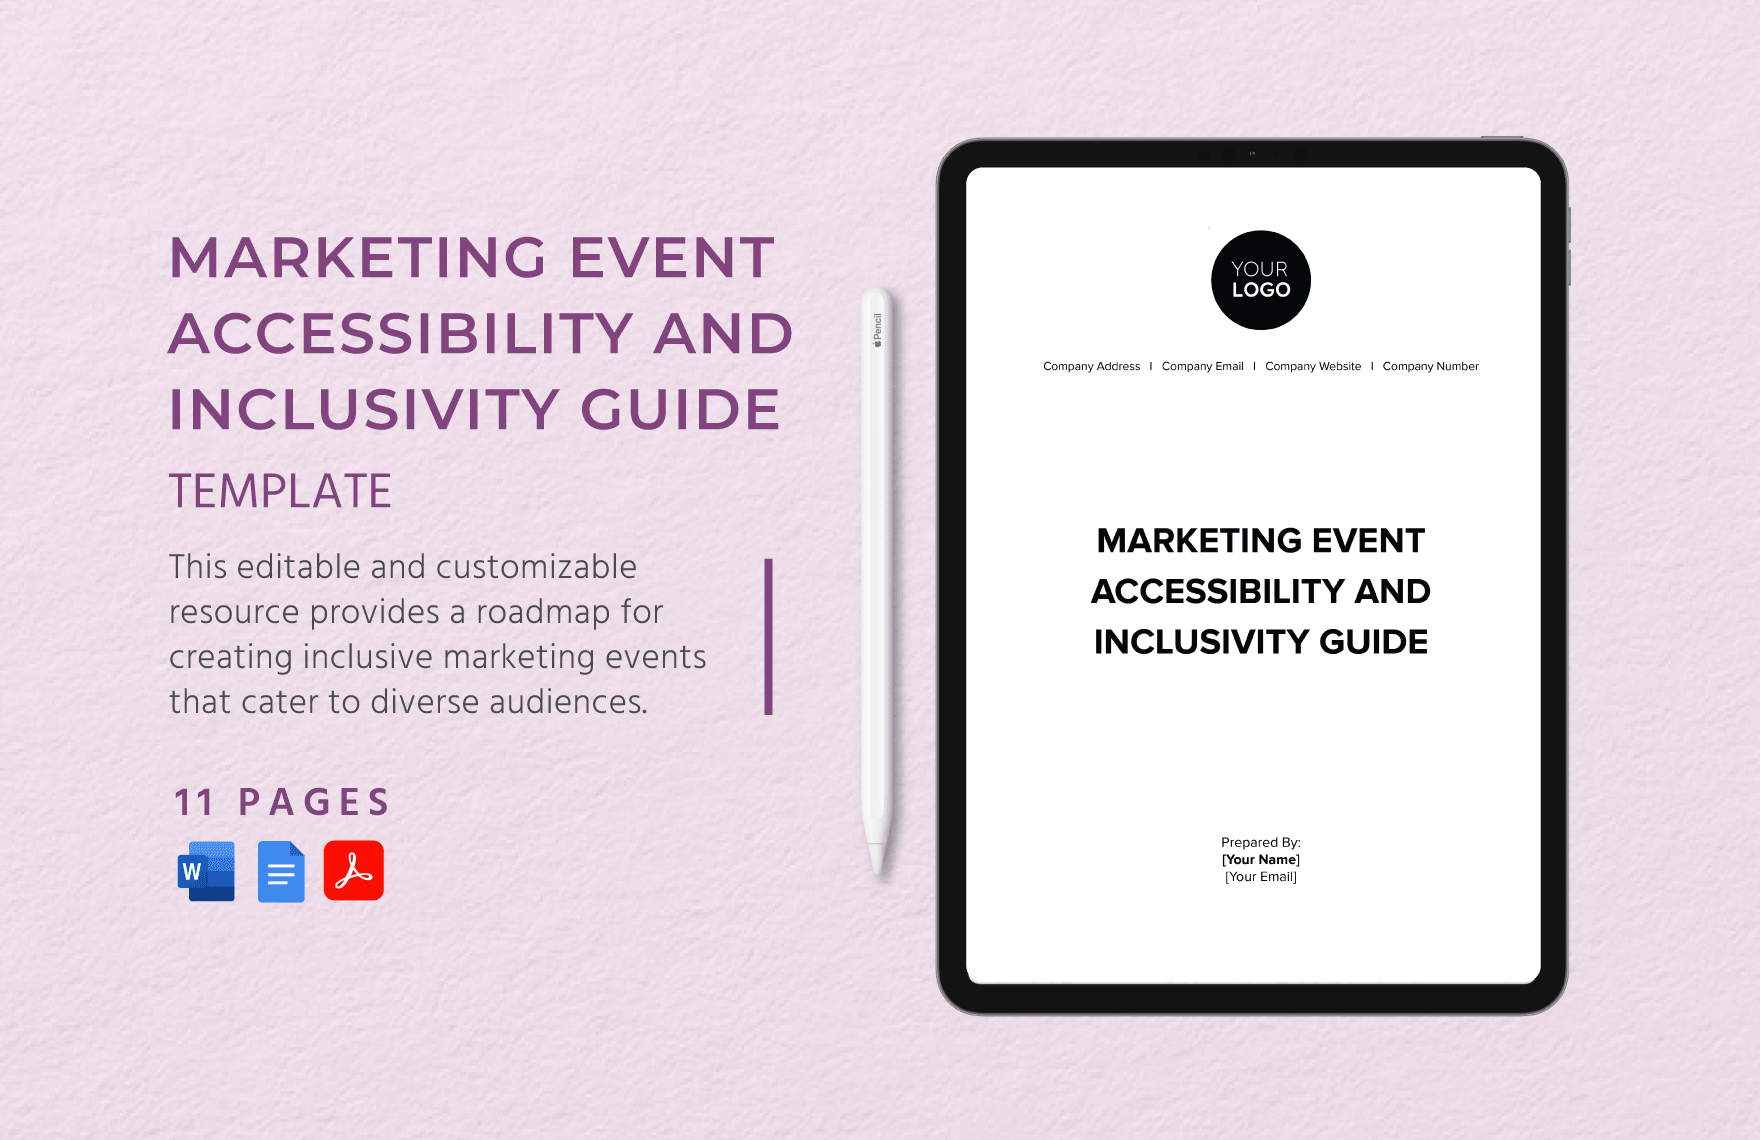 Marketing Event Accessibility and Inclusivity Guide Template